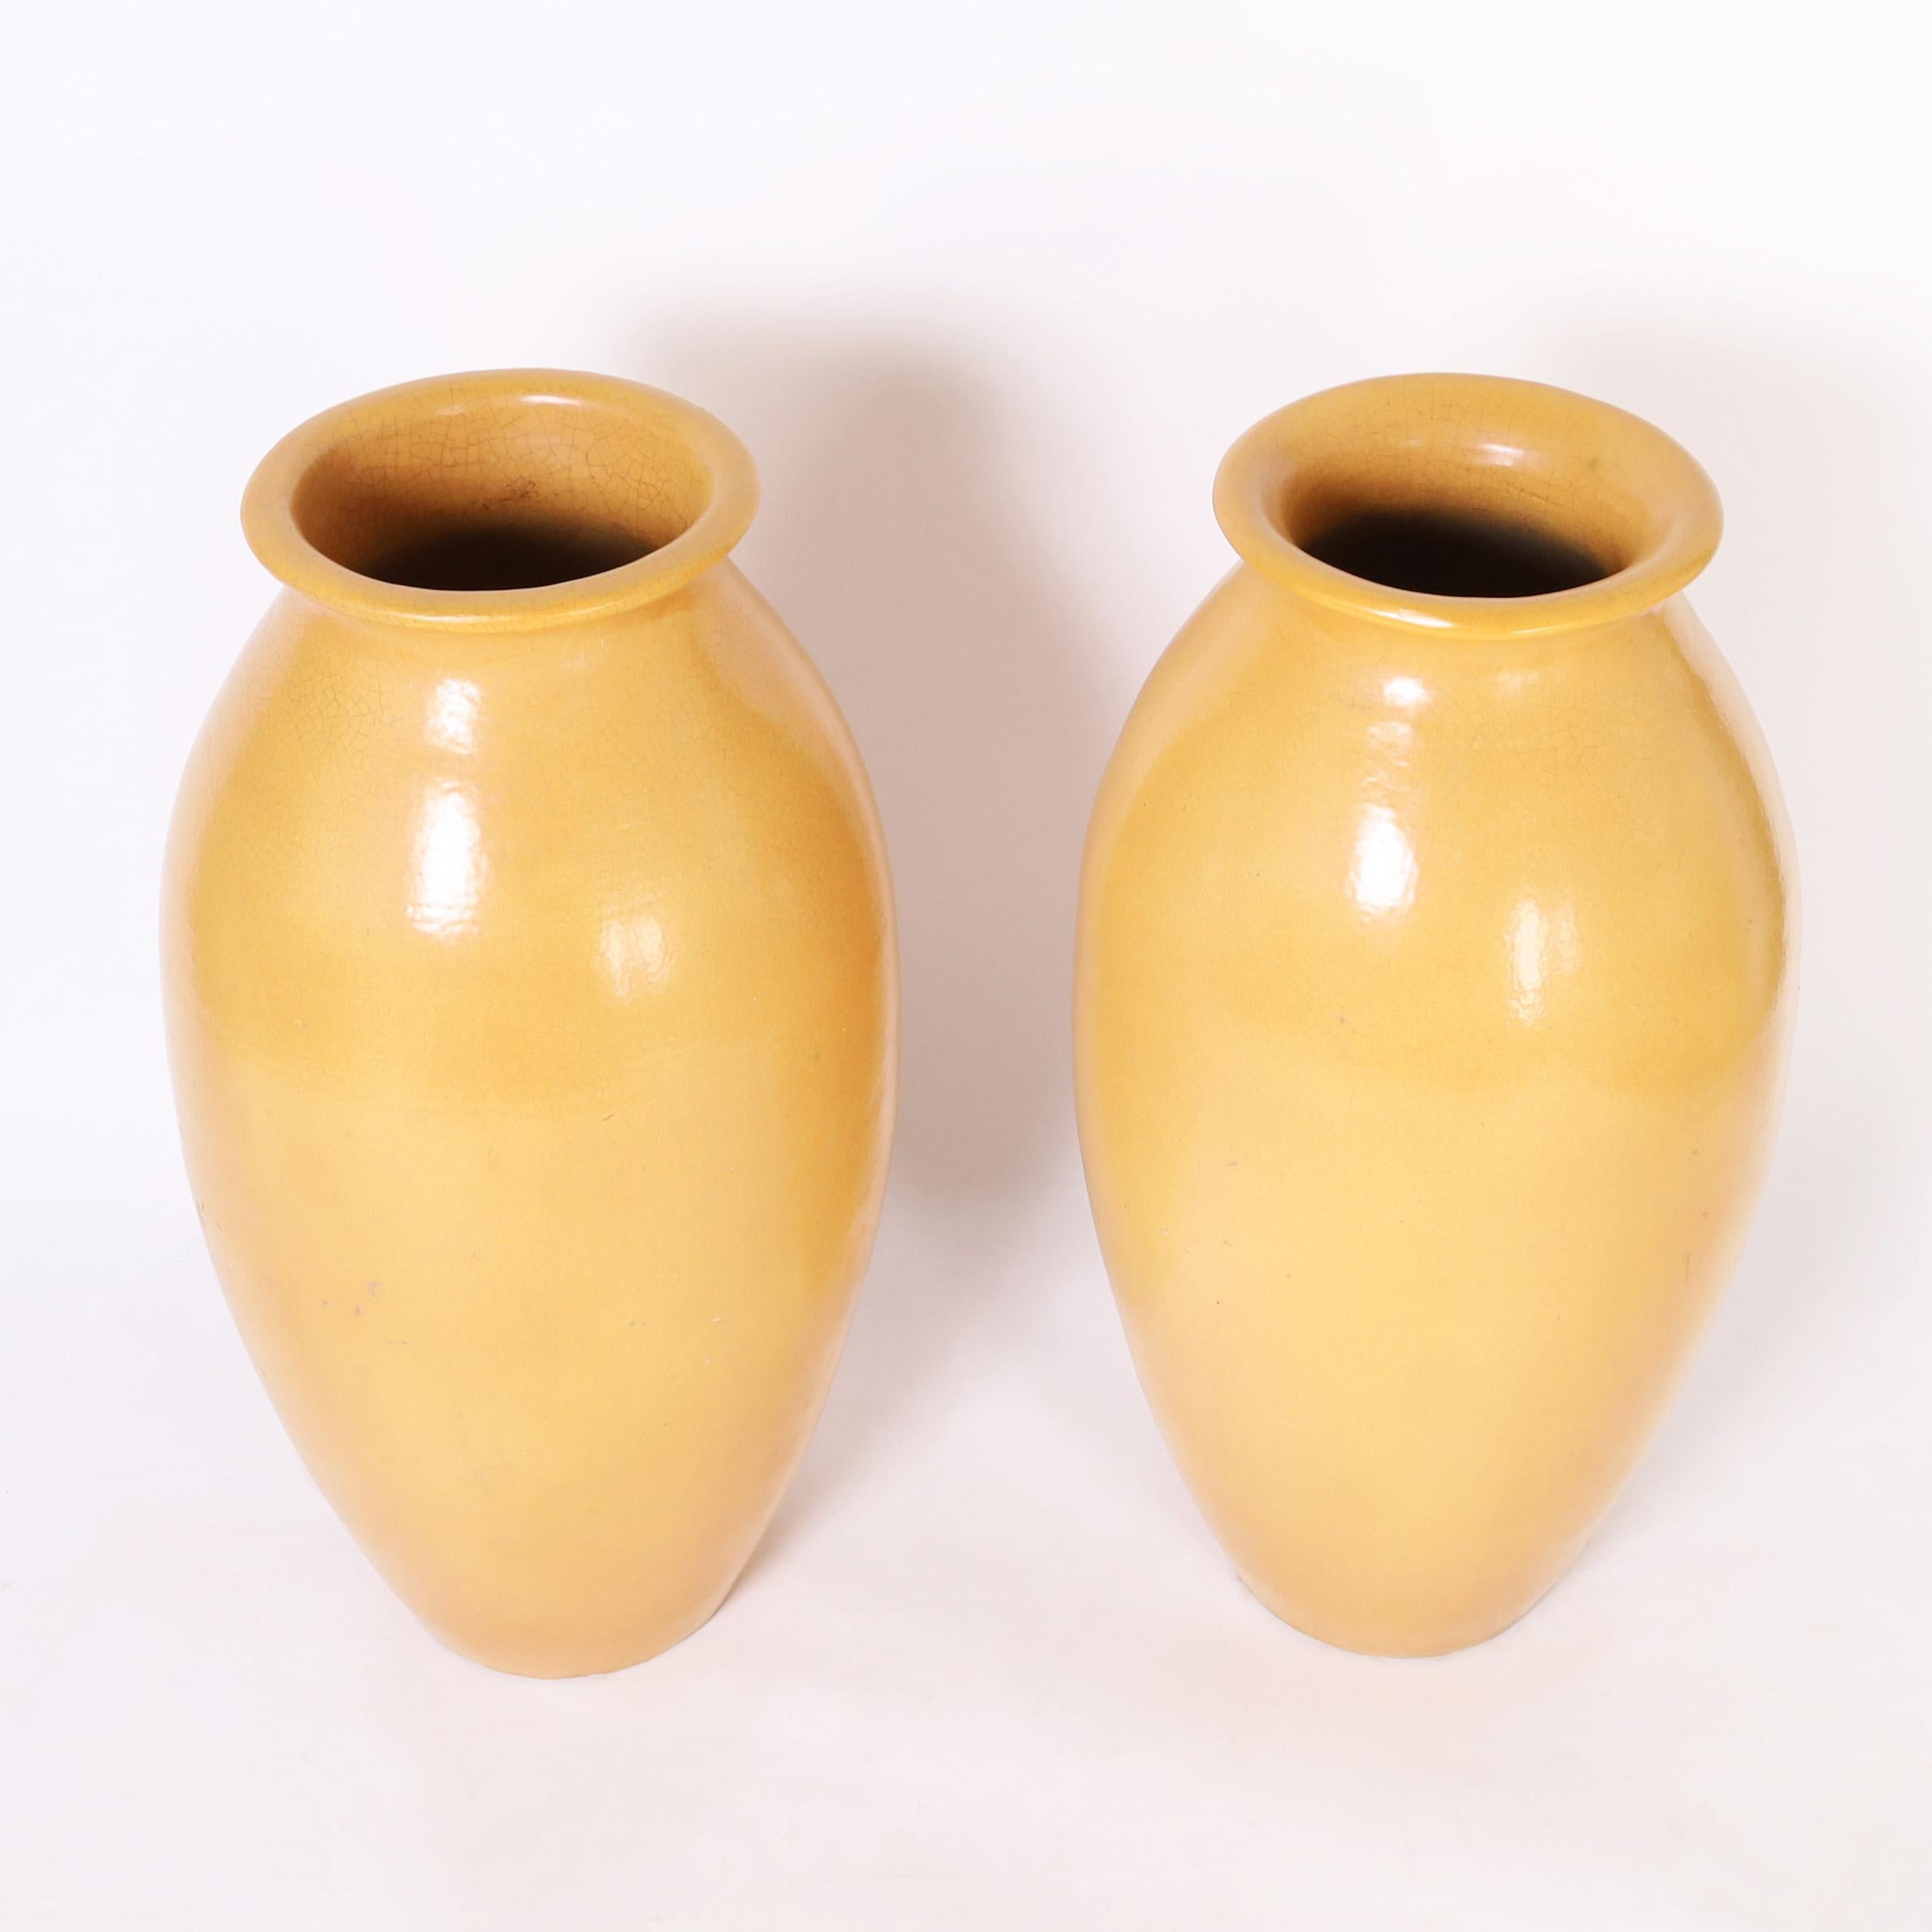 Impressive pair of architecturally interesting French jardinieres hand crafted in terra cotta in a bold scale with classic form having an alluring yellow glaze.